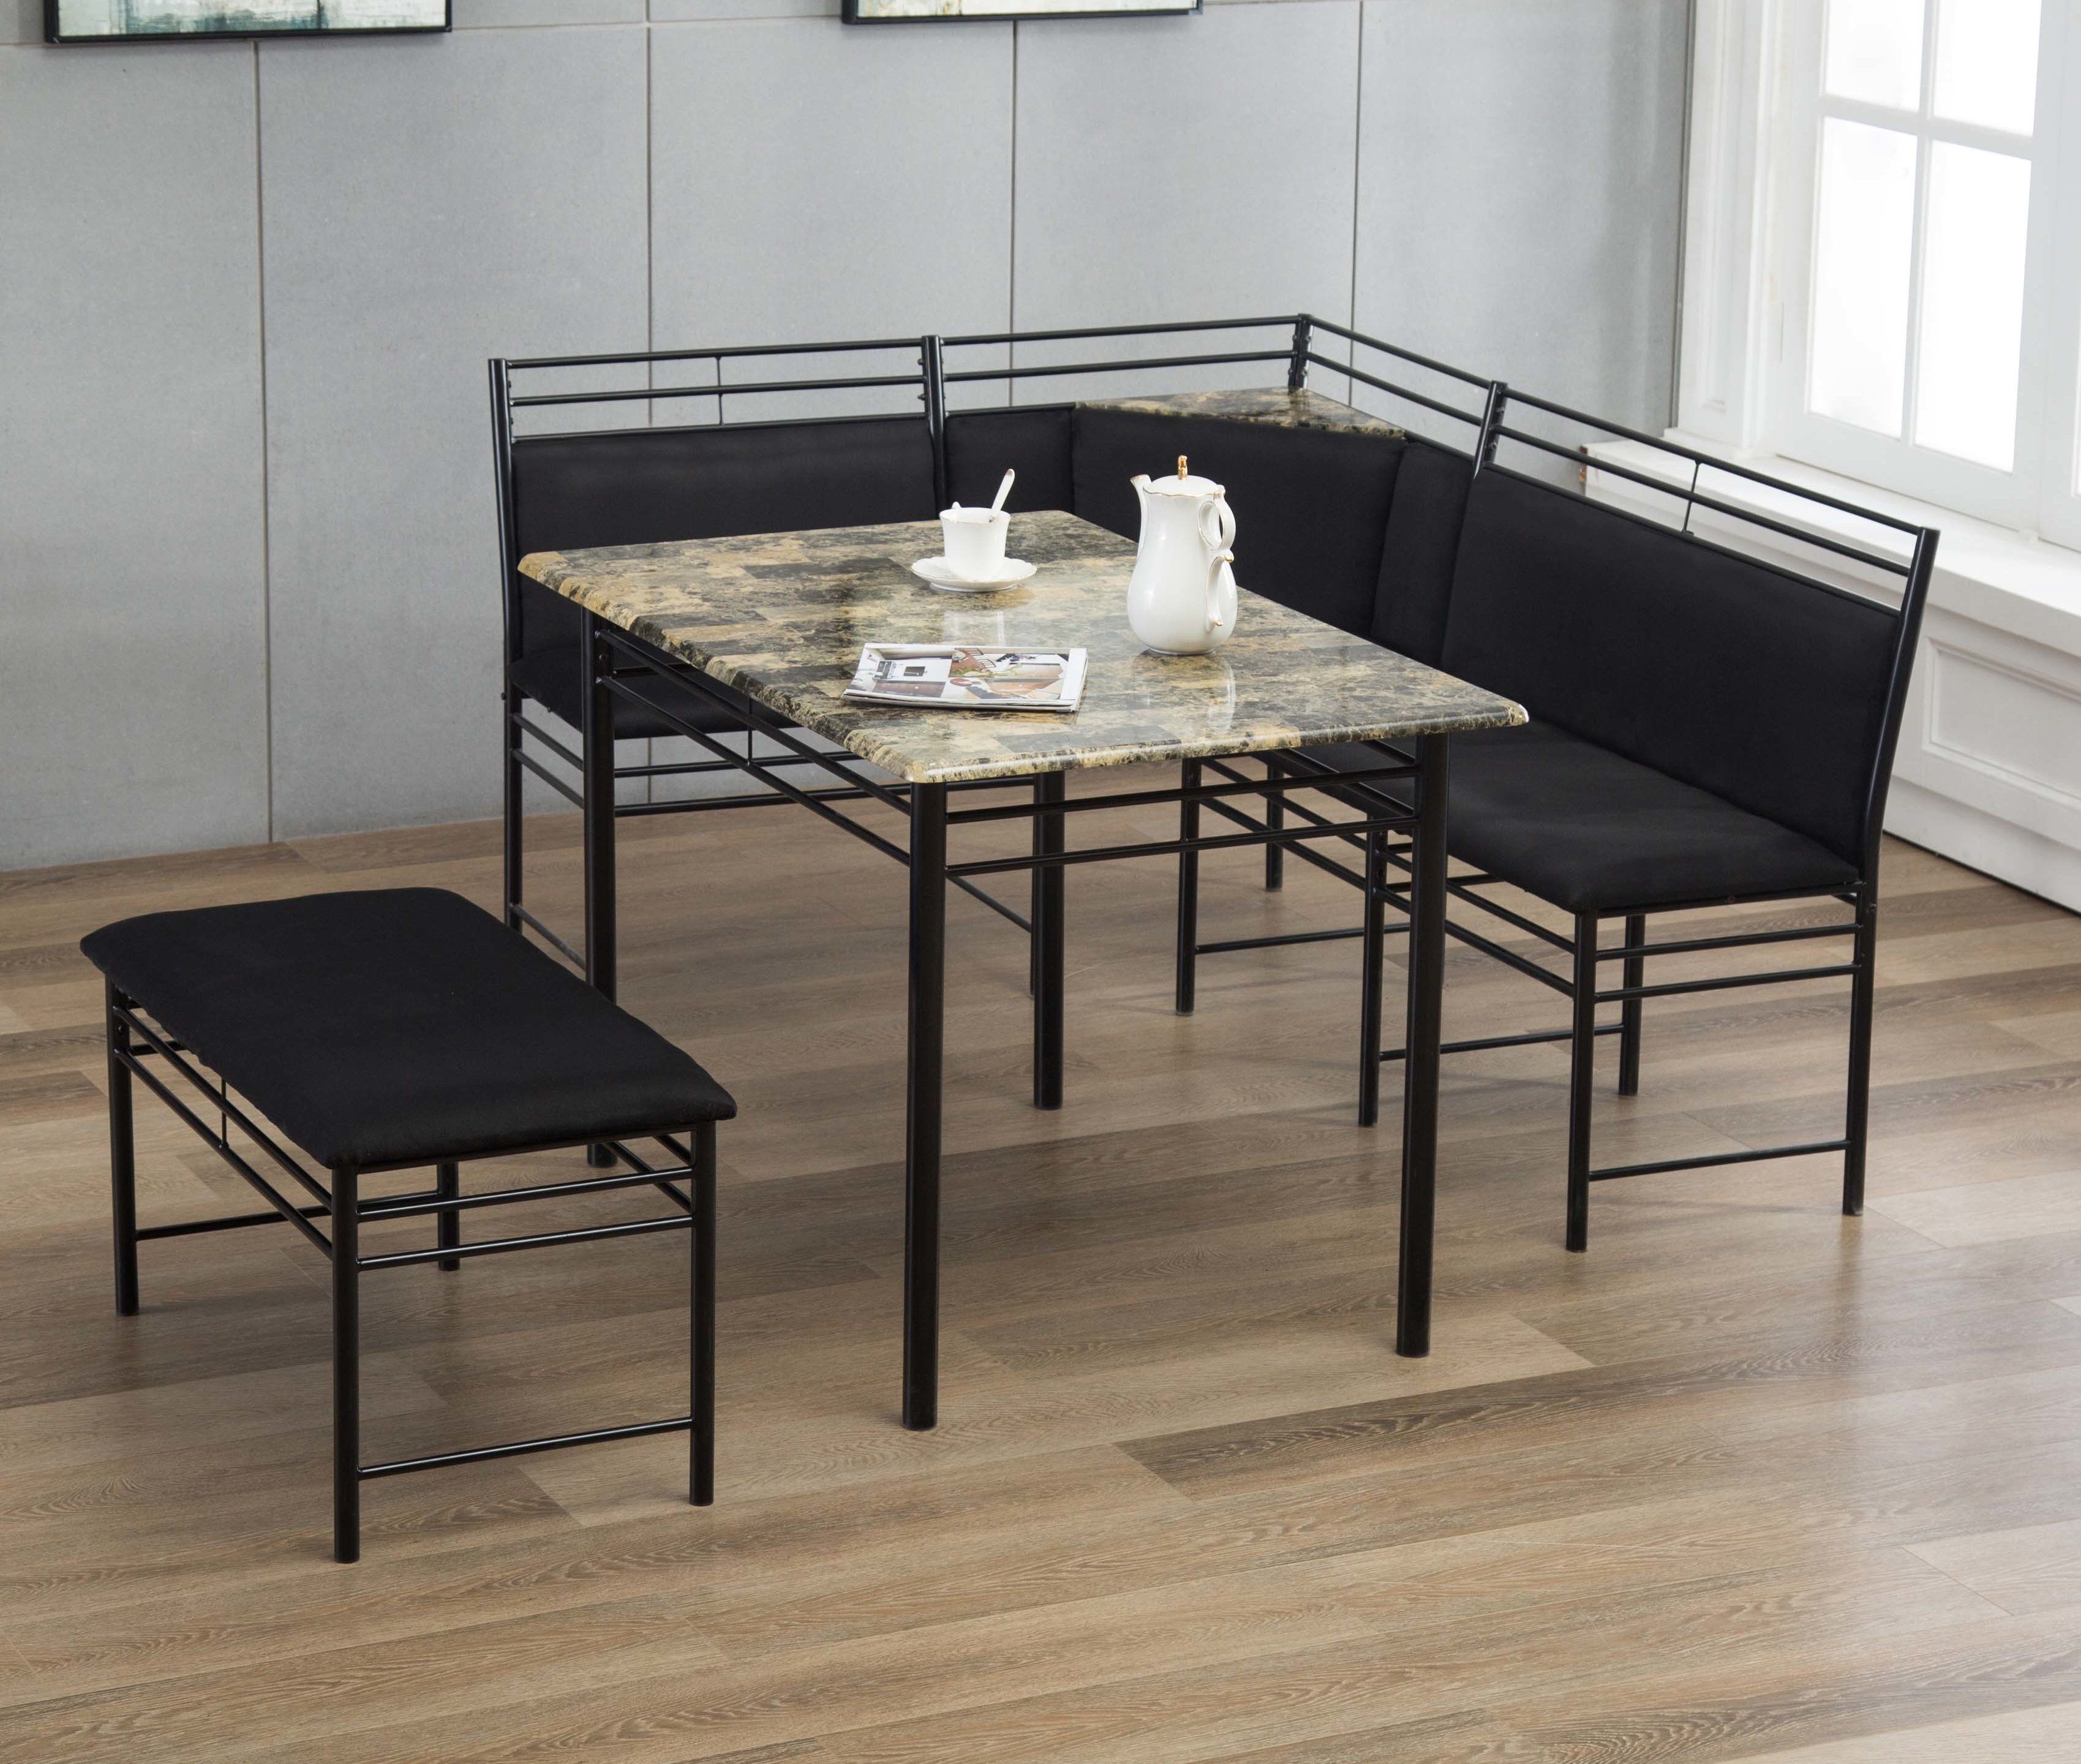 3 Piece Breakfast Dining Sets Within Well Known Winston Porter Tyrell 3 Piece Breakfast Nook Dining Set & Reviews (Photo 1 of 20)